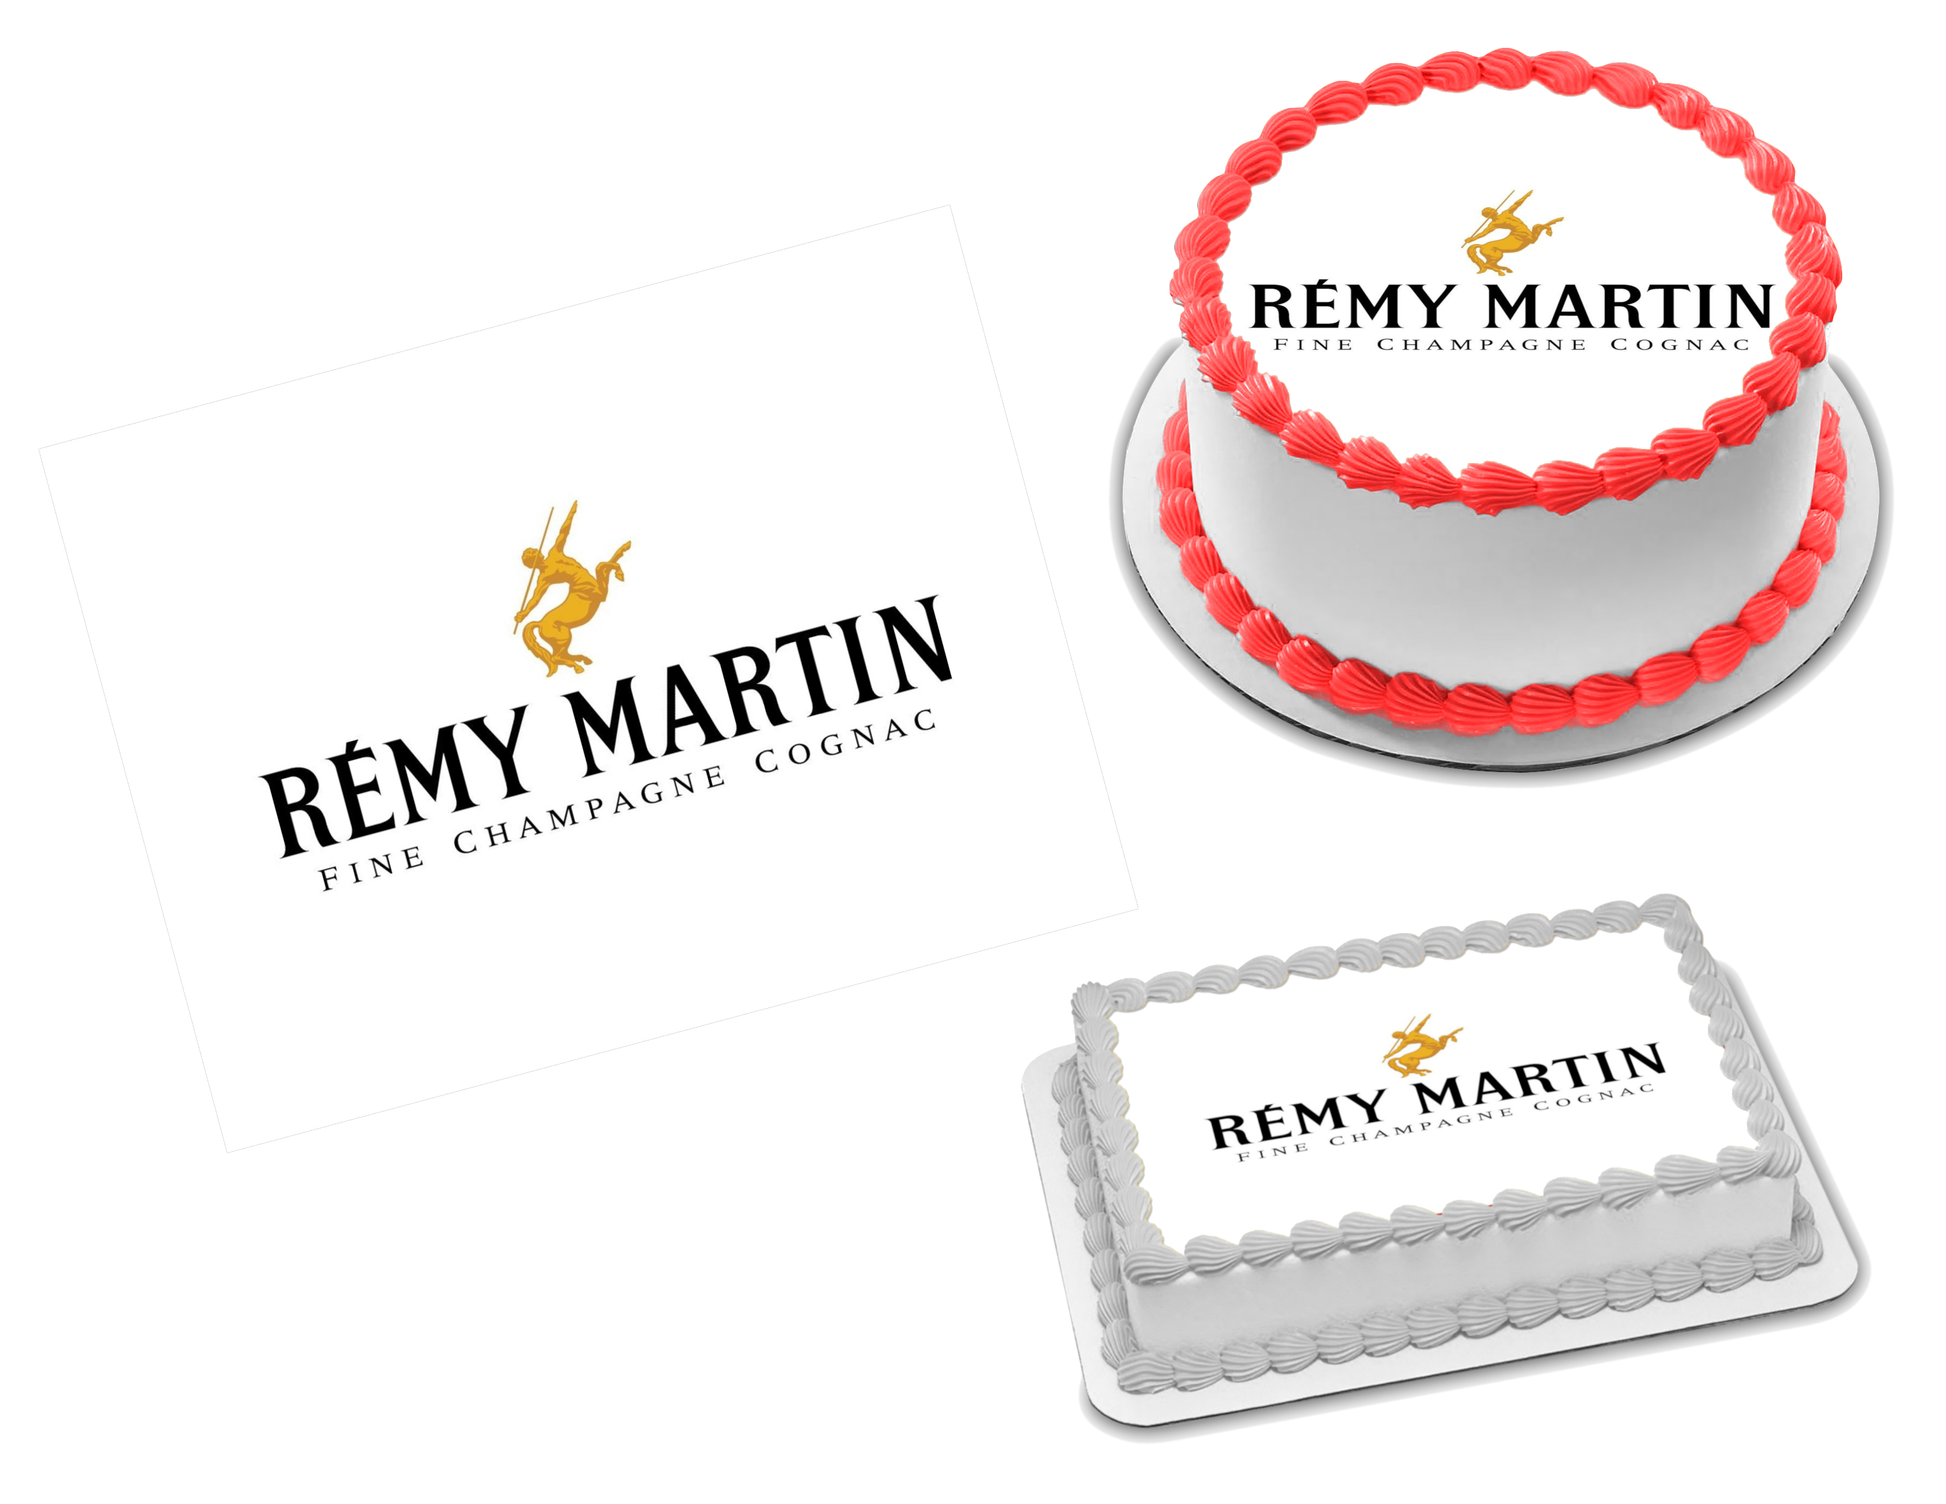 Remy Martin Cognac Edible Image Frosting Sheet #3 (70+ sizes)